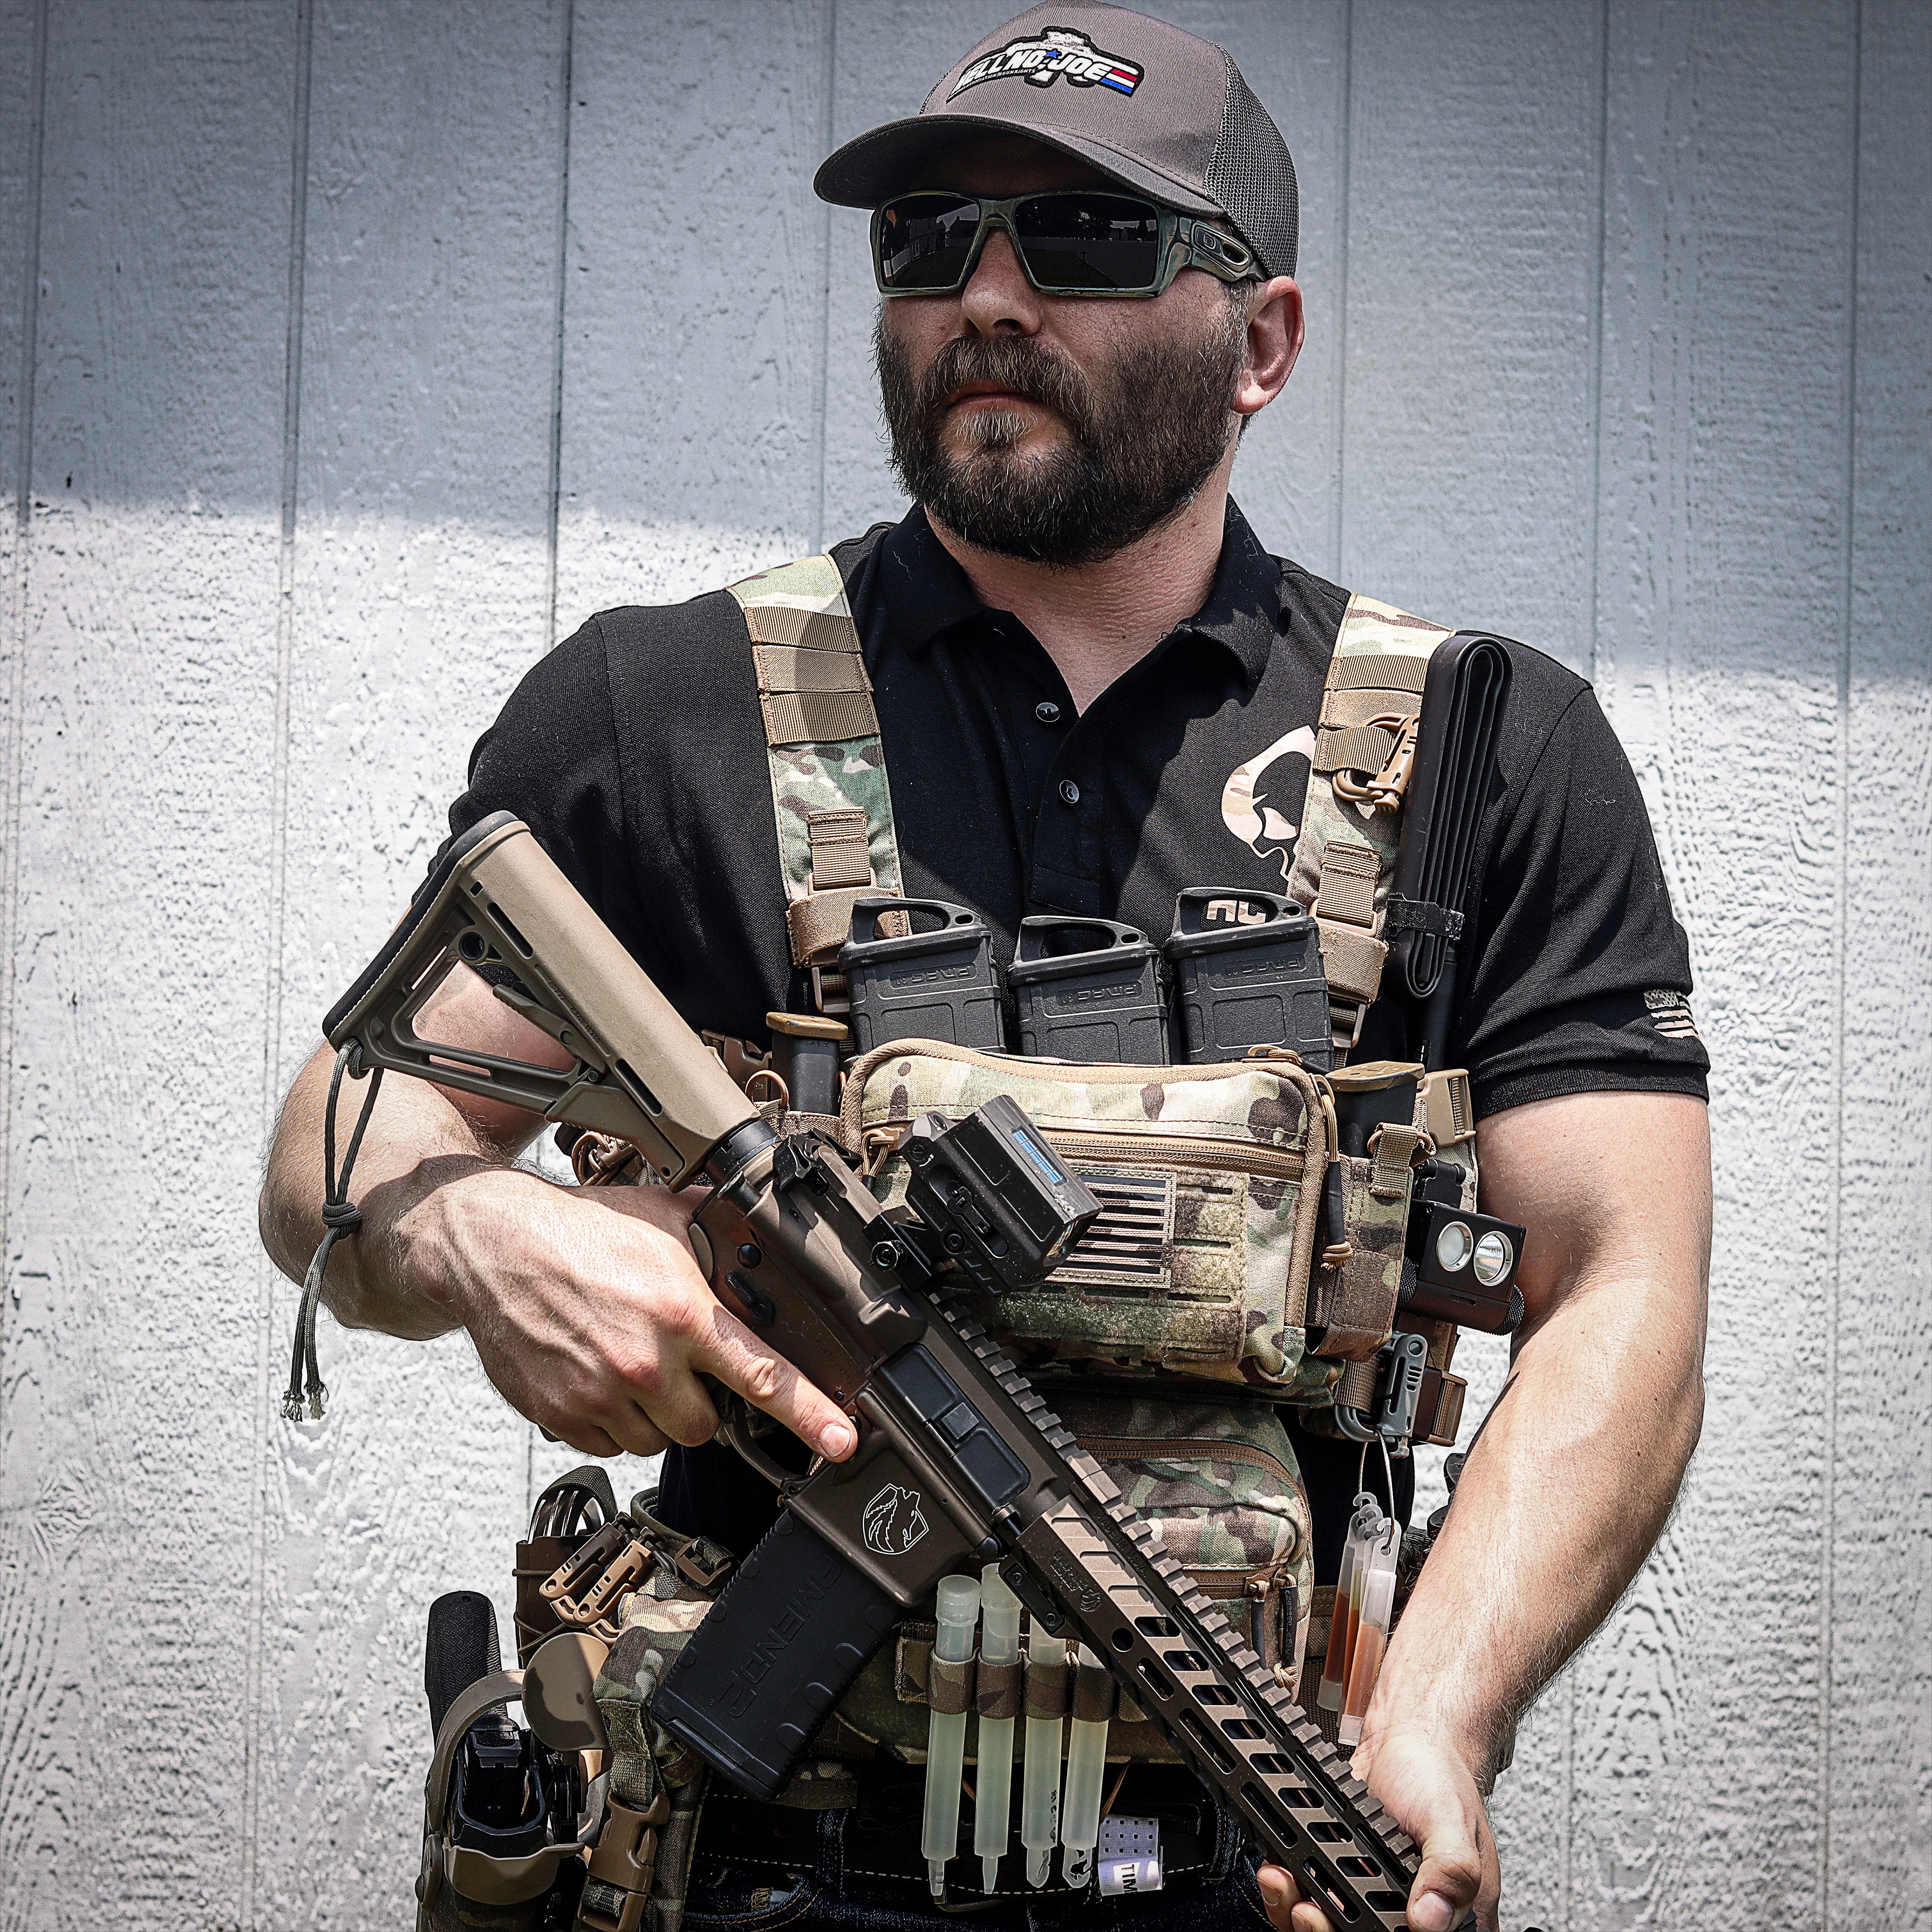 Experience Ultimate Versatility With The S.O.P. Micro Chest Rig